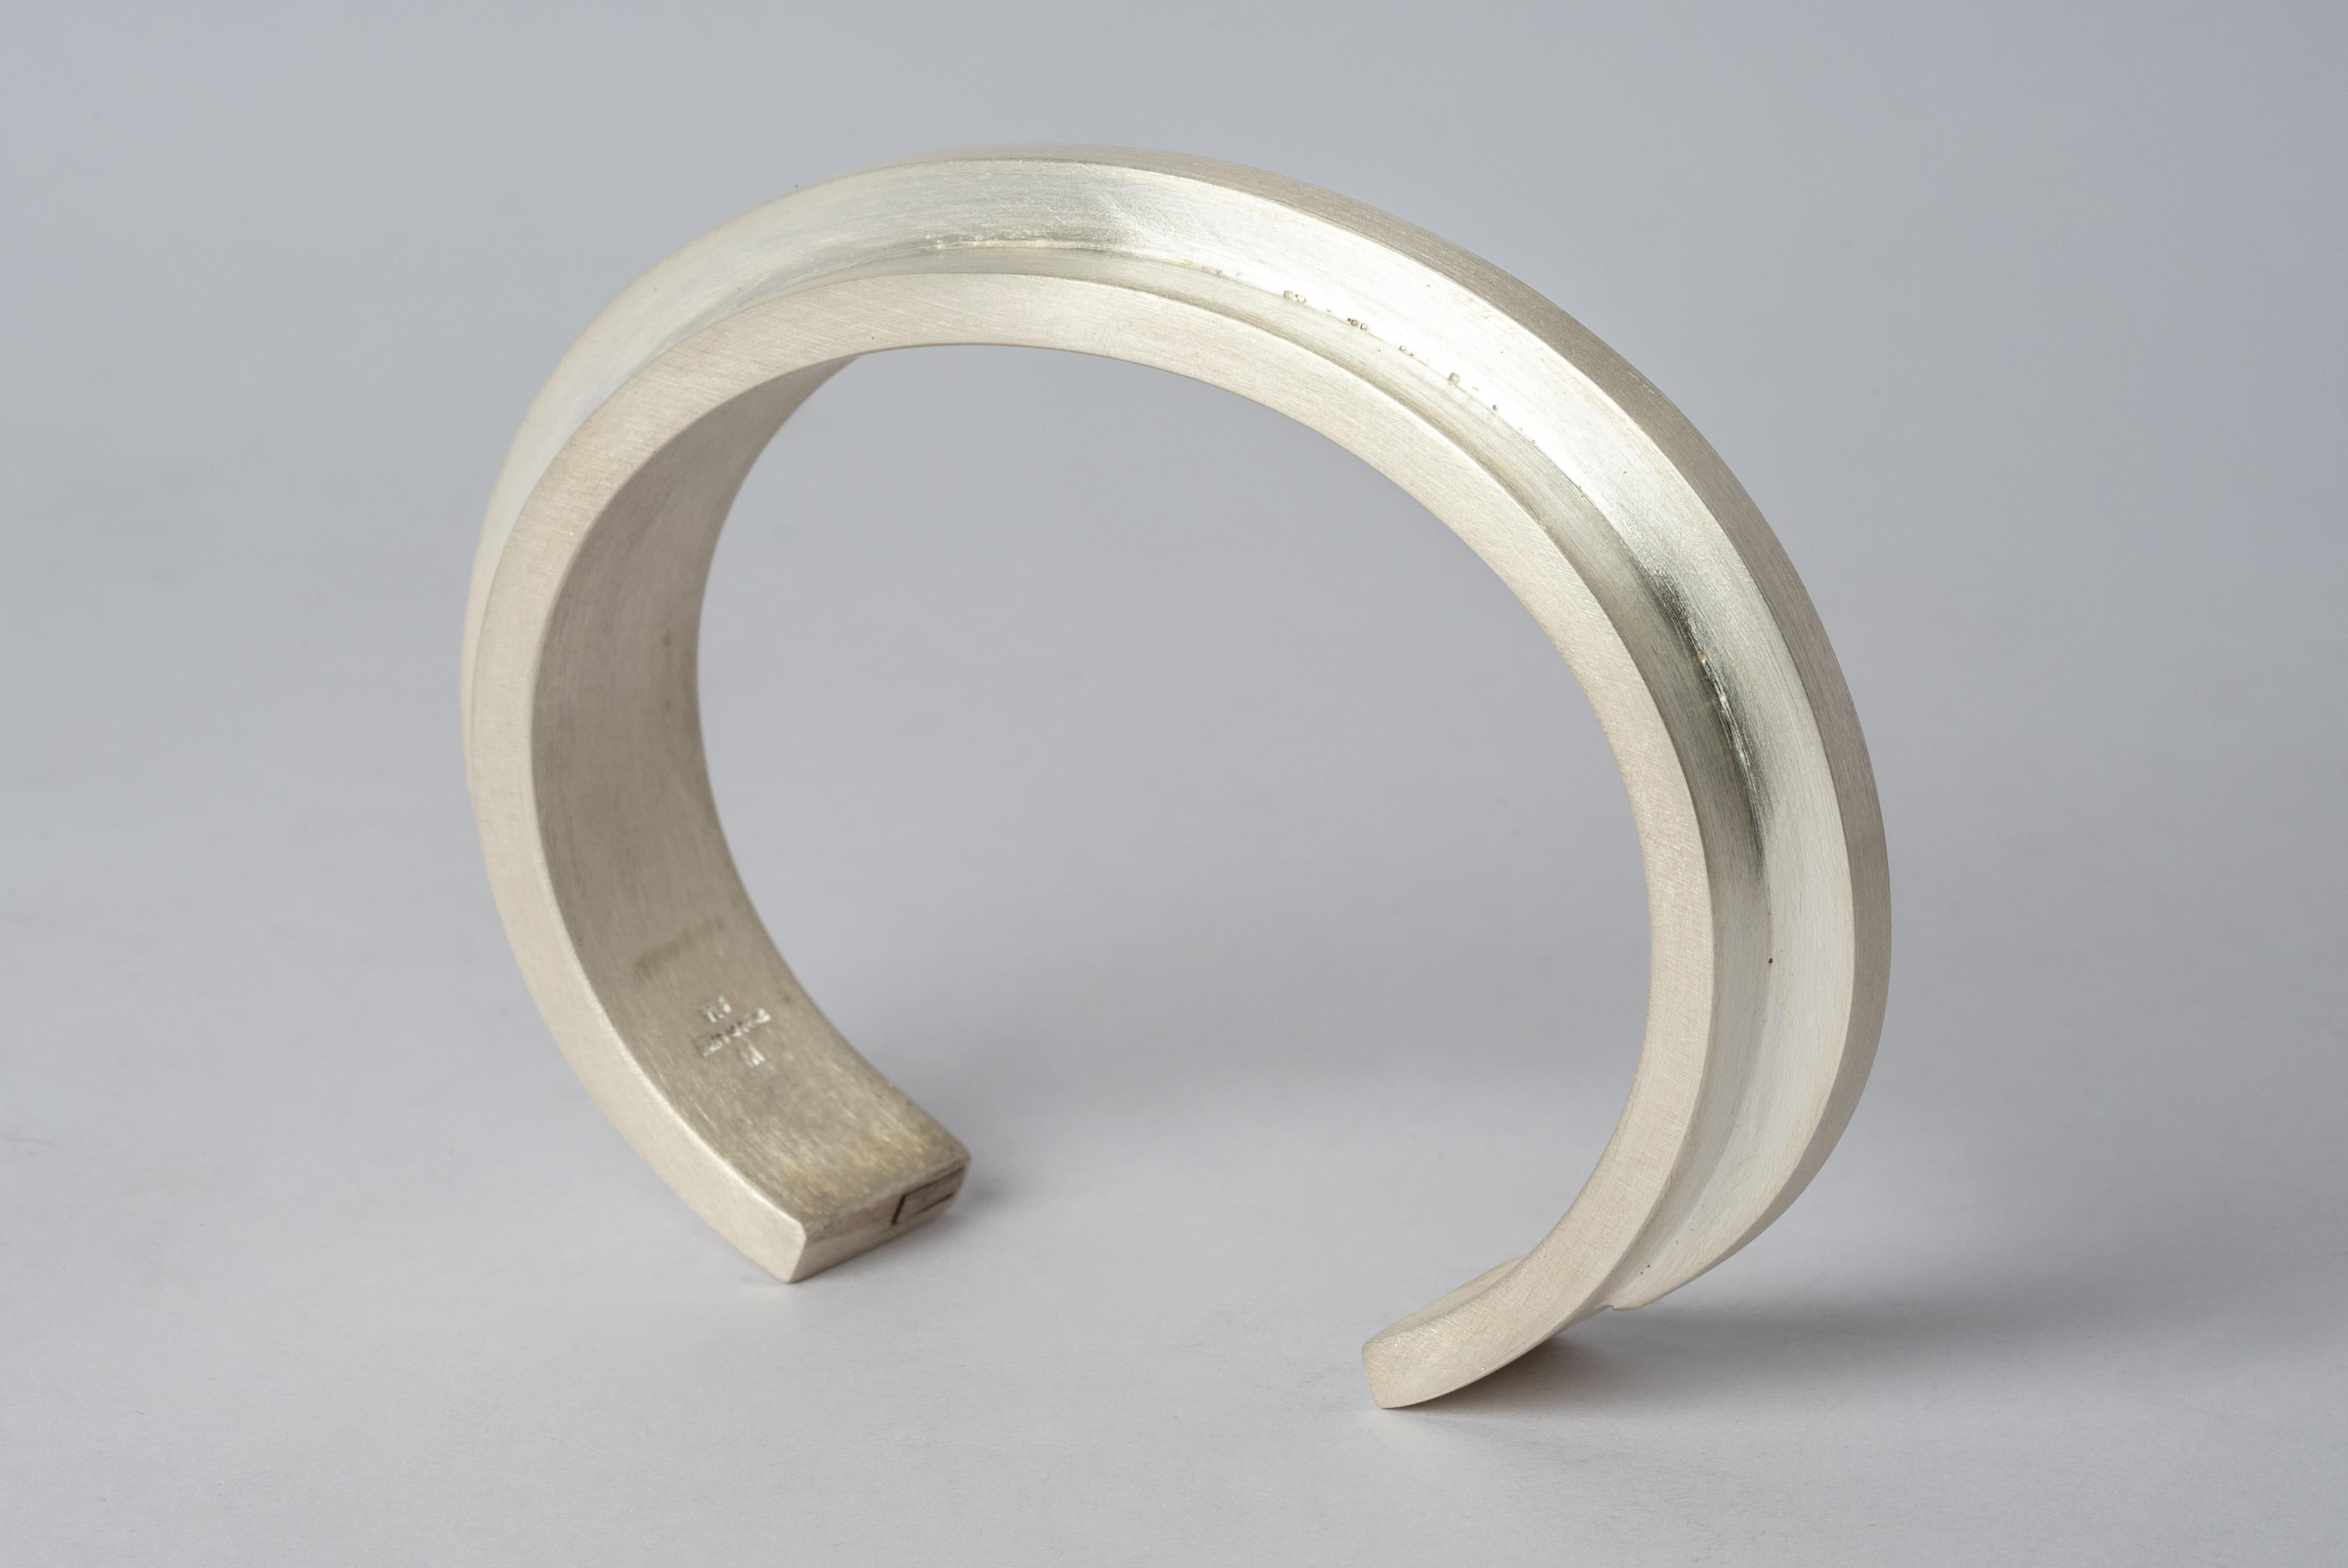 Bracelet in matte sterling silver. This piece is 100% hand fabricated from metal plate; cut into sections and soldered together to make the hollow three dimensional form. If sterling silver, the sheet metal is made by hand. The silver is melted and